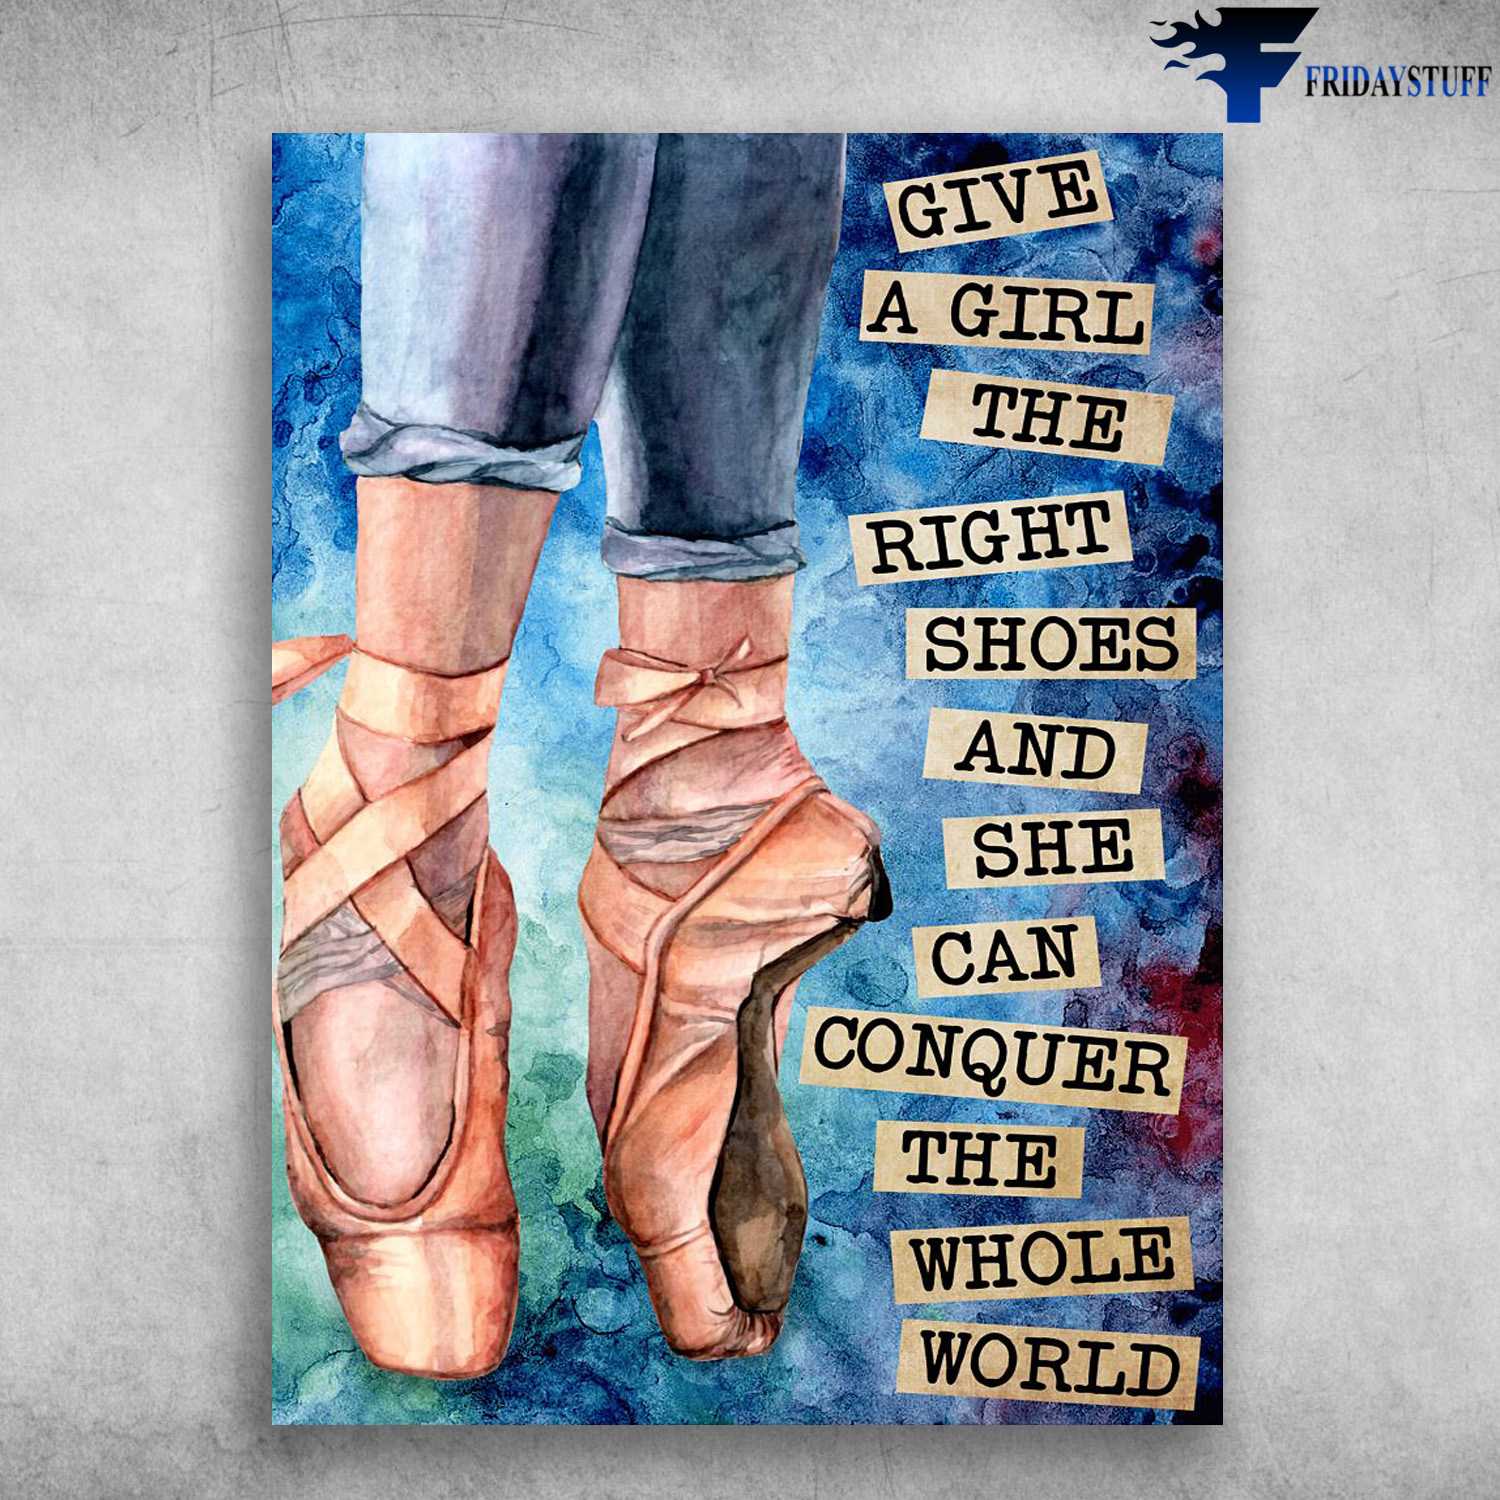 Ballet Poster, Ballet Dancer, Ballet Shoes, Give A Girl The Right Shoes, And She Can Conquer The Whole World